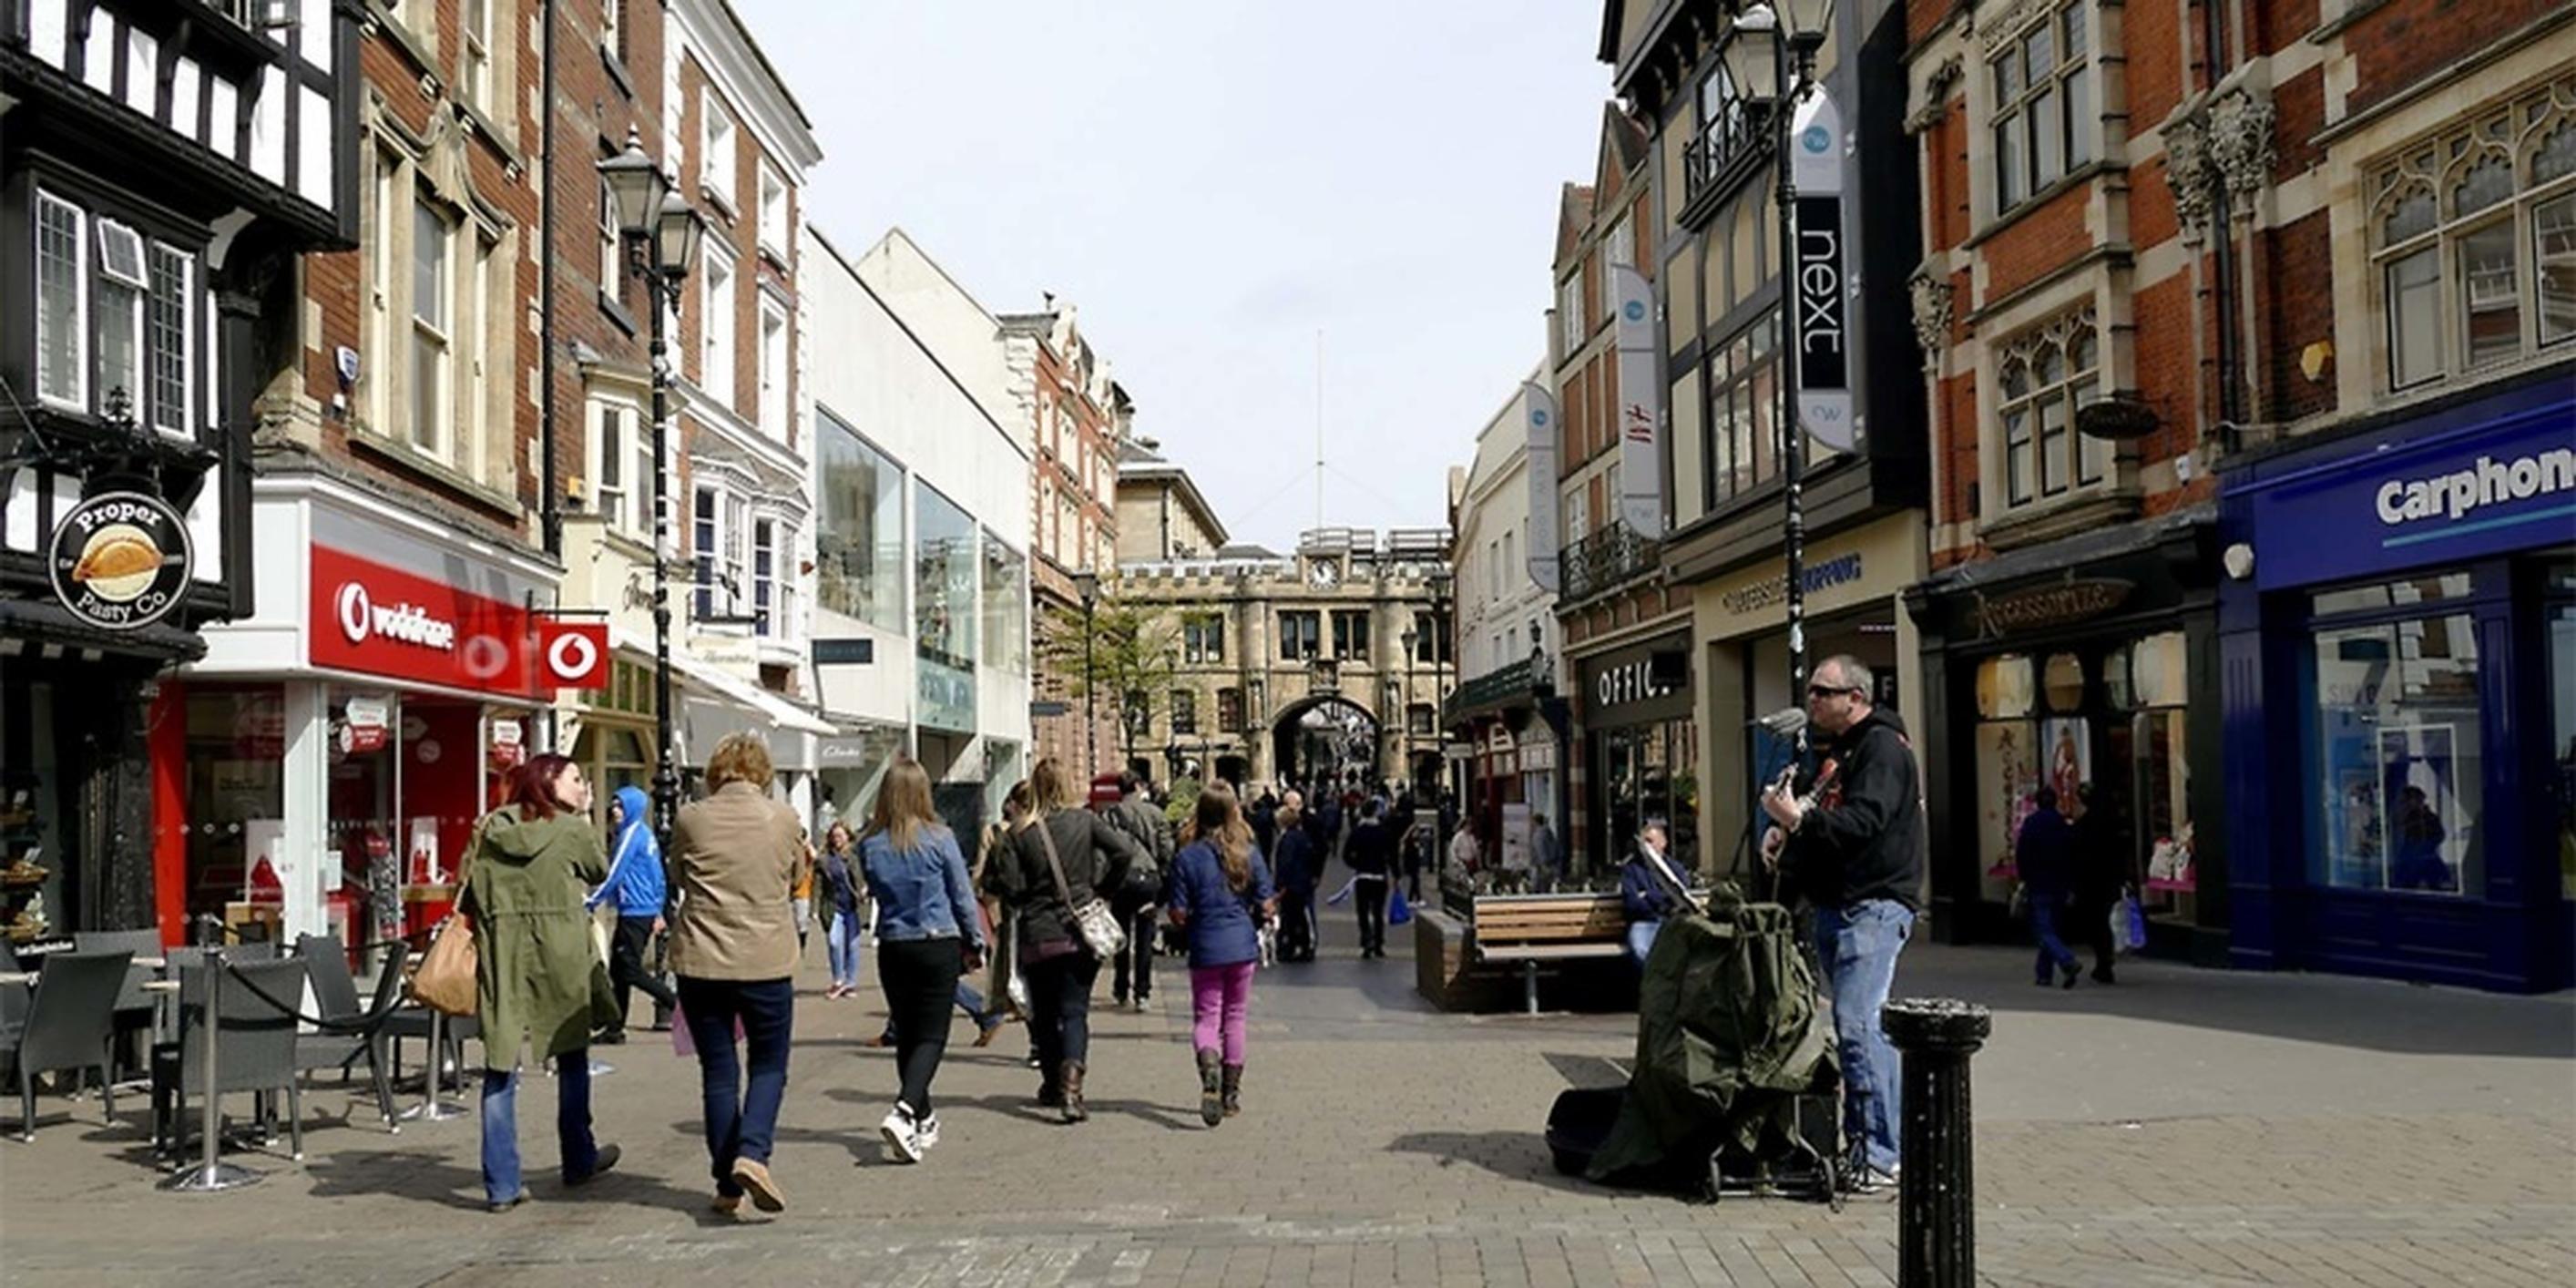 The Housing, Communities and Local Government Committee state in High Streets and Town Centres in 2030